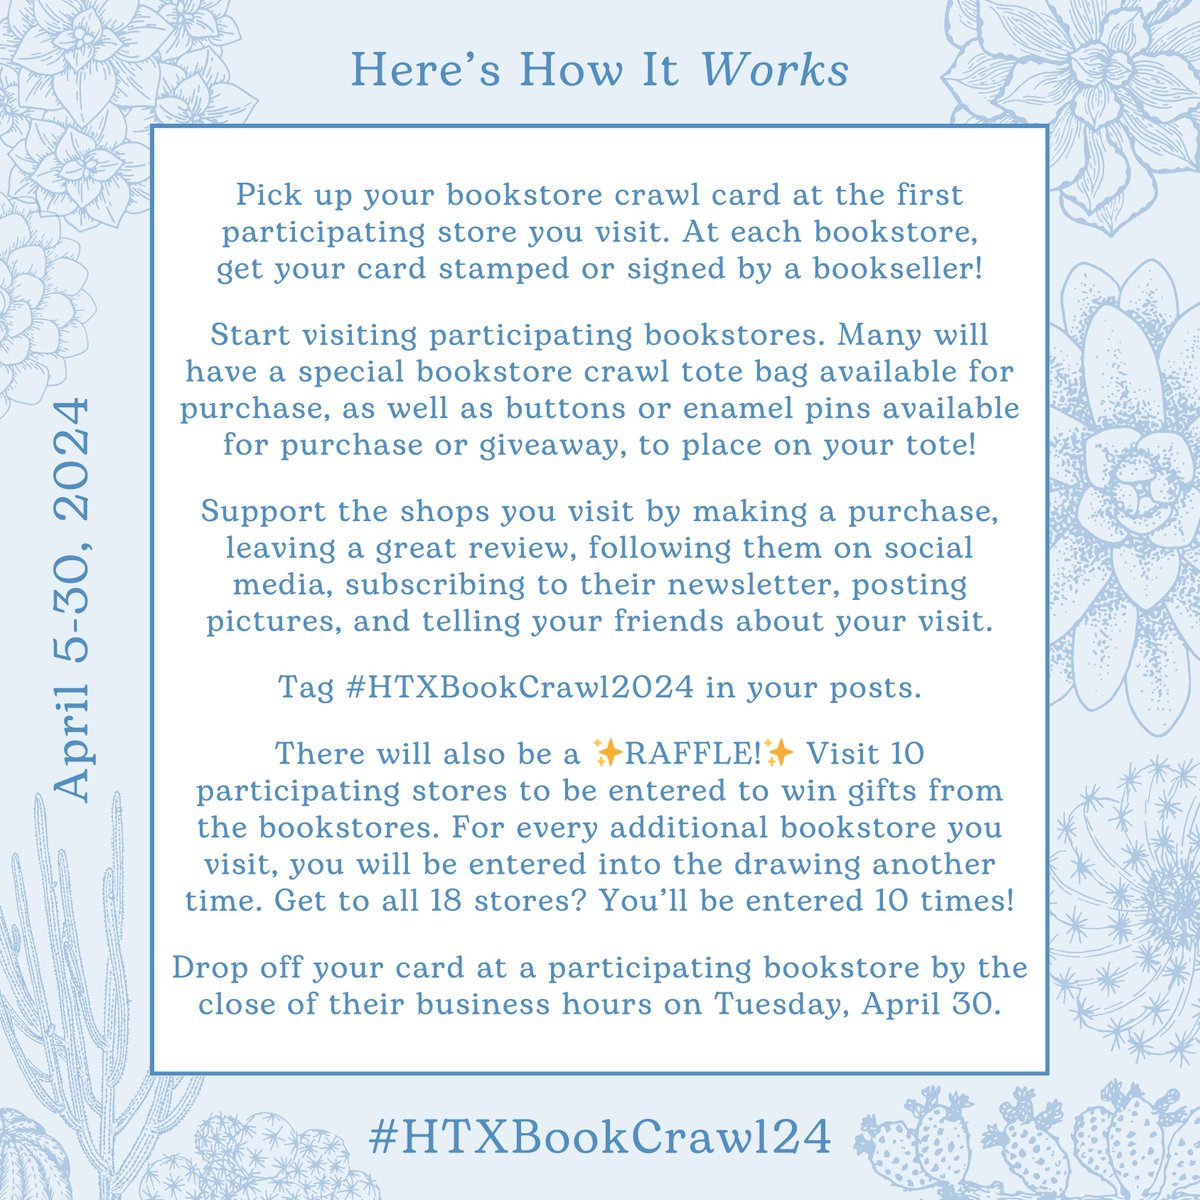 ✨The first-ever #Houston Bookstore Crawl is happening now!✨

18 Houston-area indie bookshops invite you to visit us this month—not only on #IndieBookstoreDay, but all April! 🥳

Visit our website for the details on #HTXBookCrawl24: bluewillowbookshop.com/HTXBookCrawl24